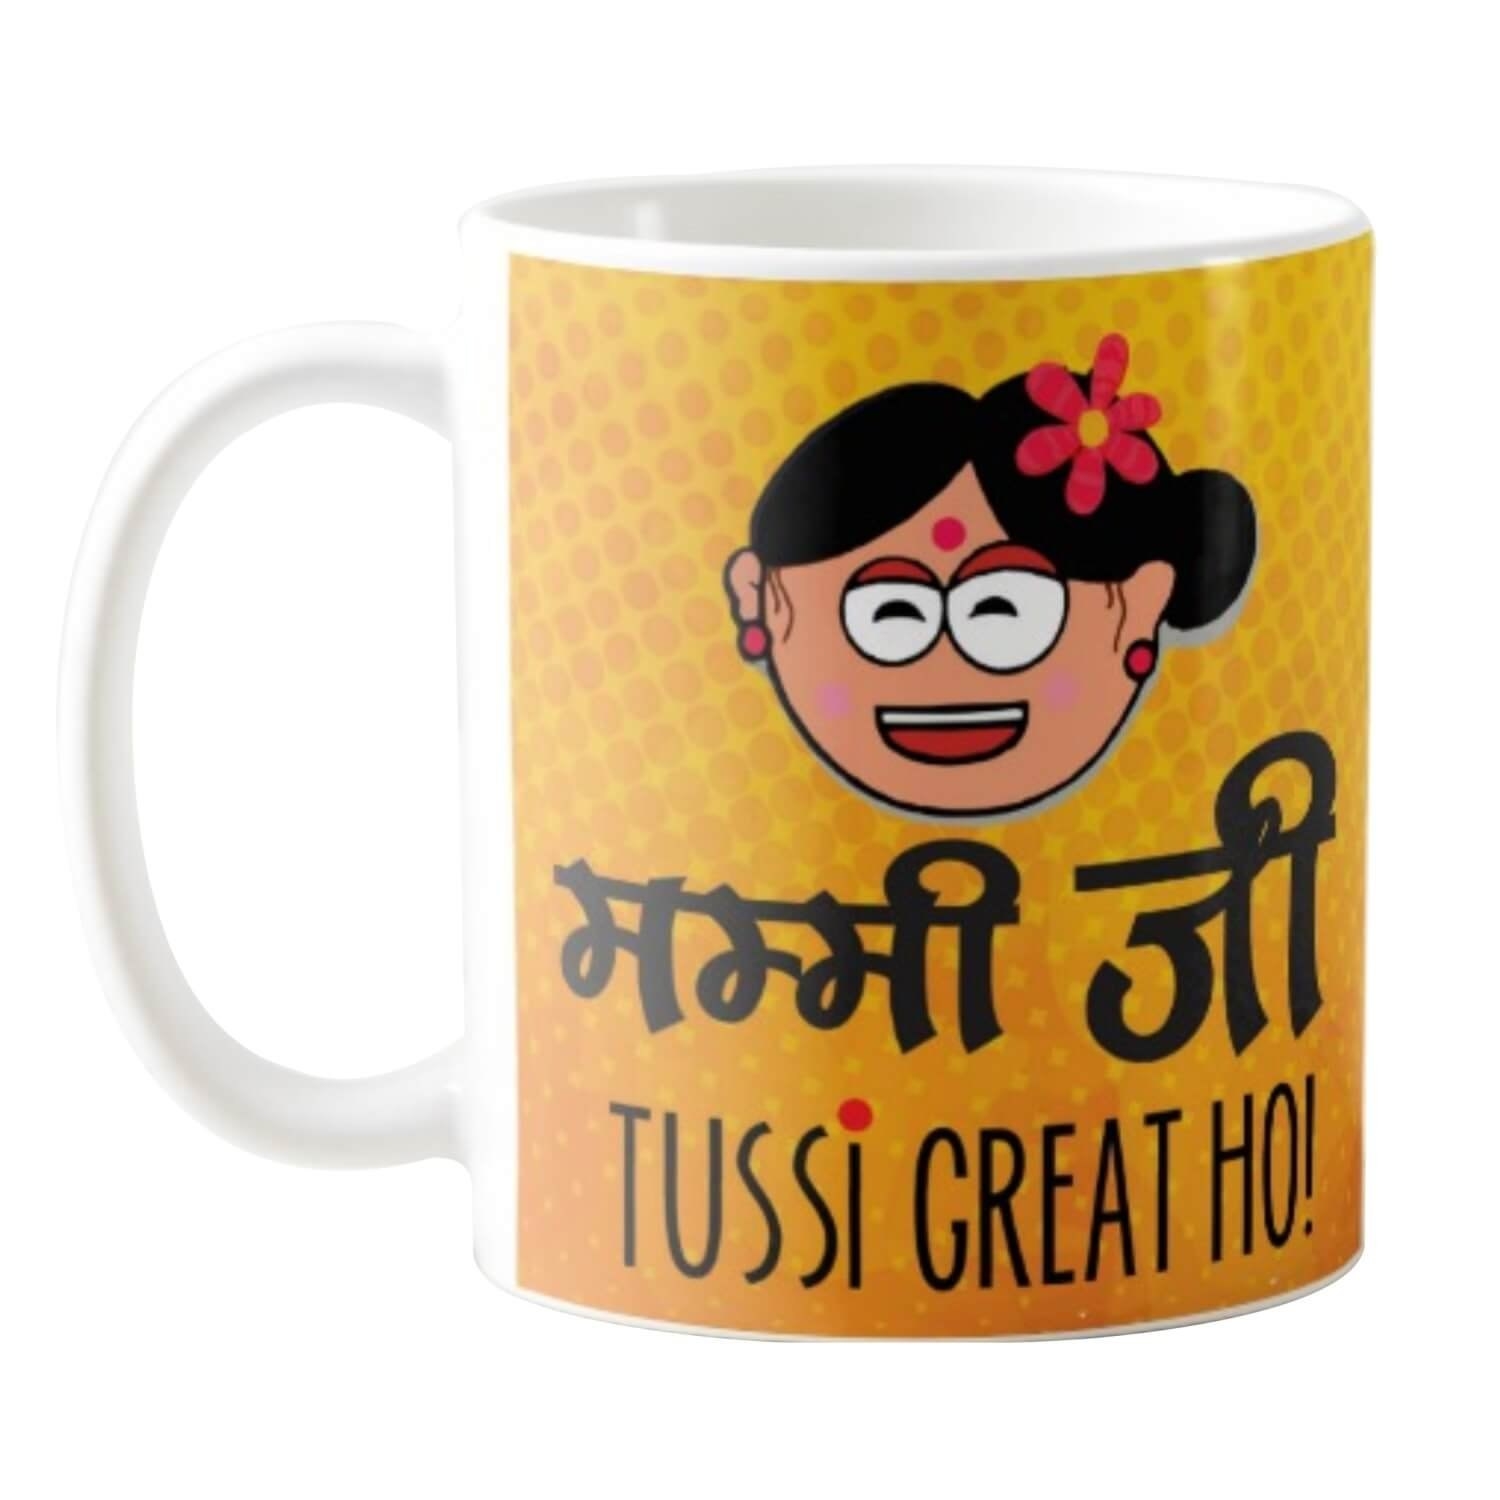 Gifts for Mom in India. Send Gifts for Mother